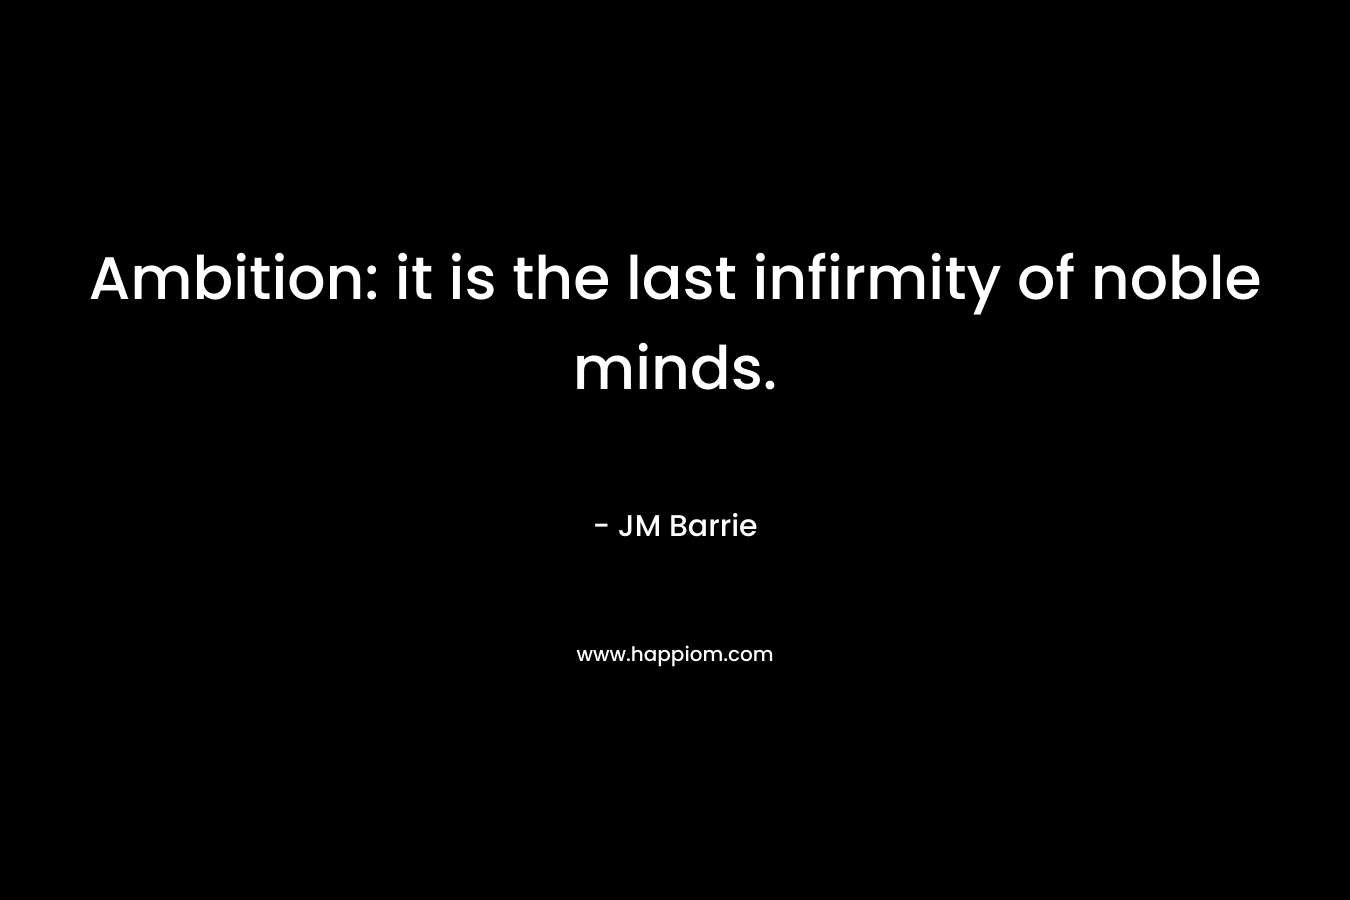 Ambition: it is the last infirmity of noble minds.